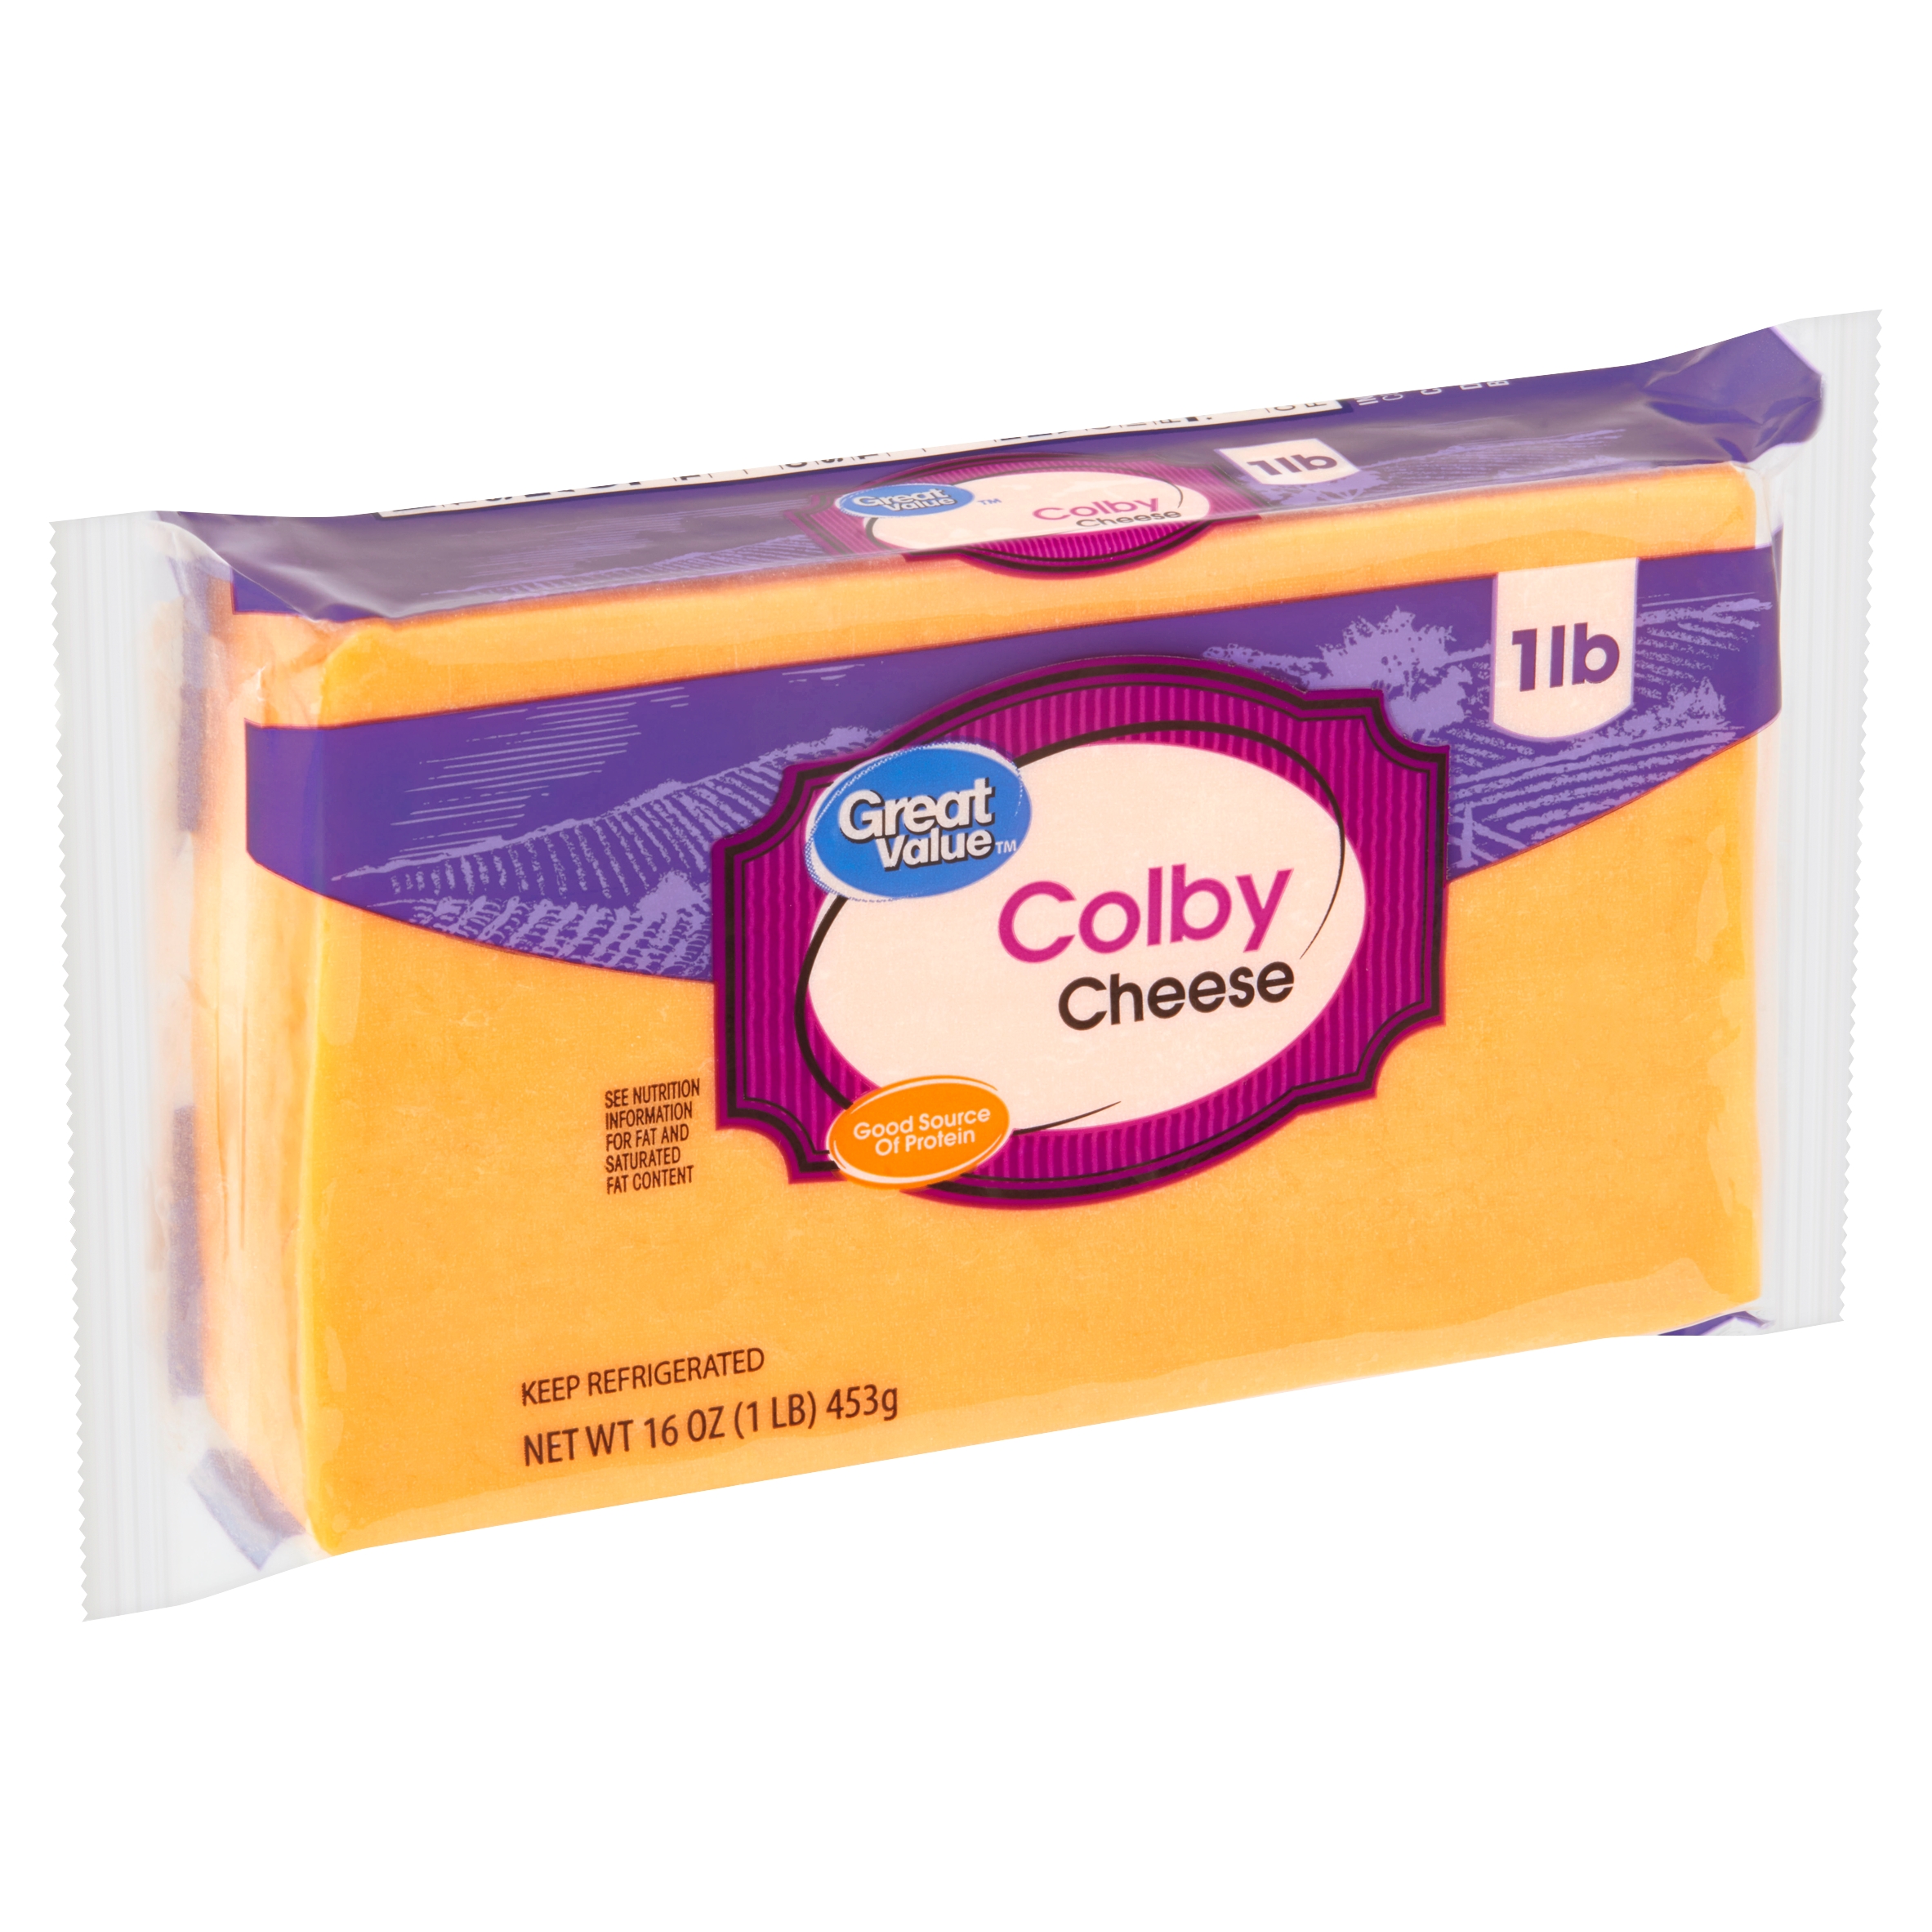 Great Value Colby Cheese, 16 Oz Image